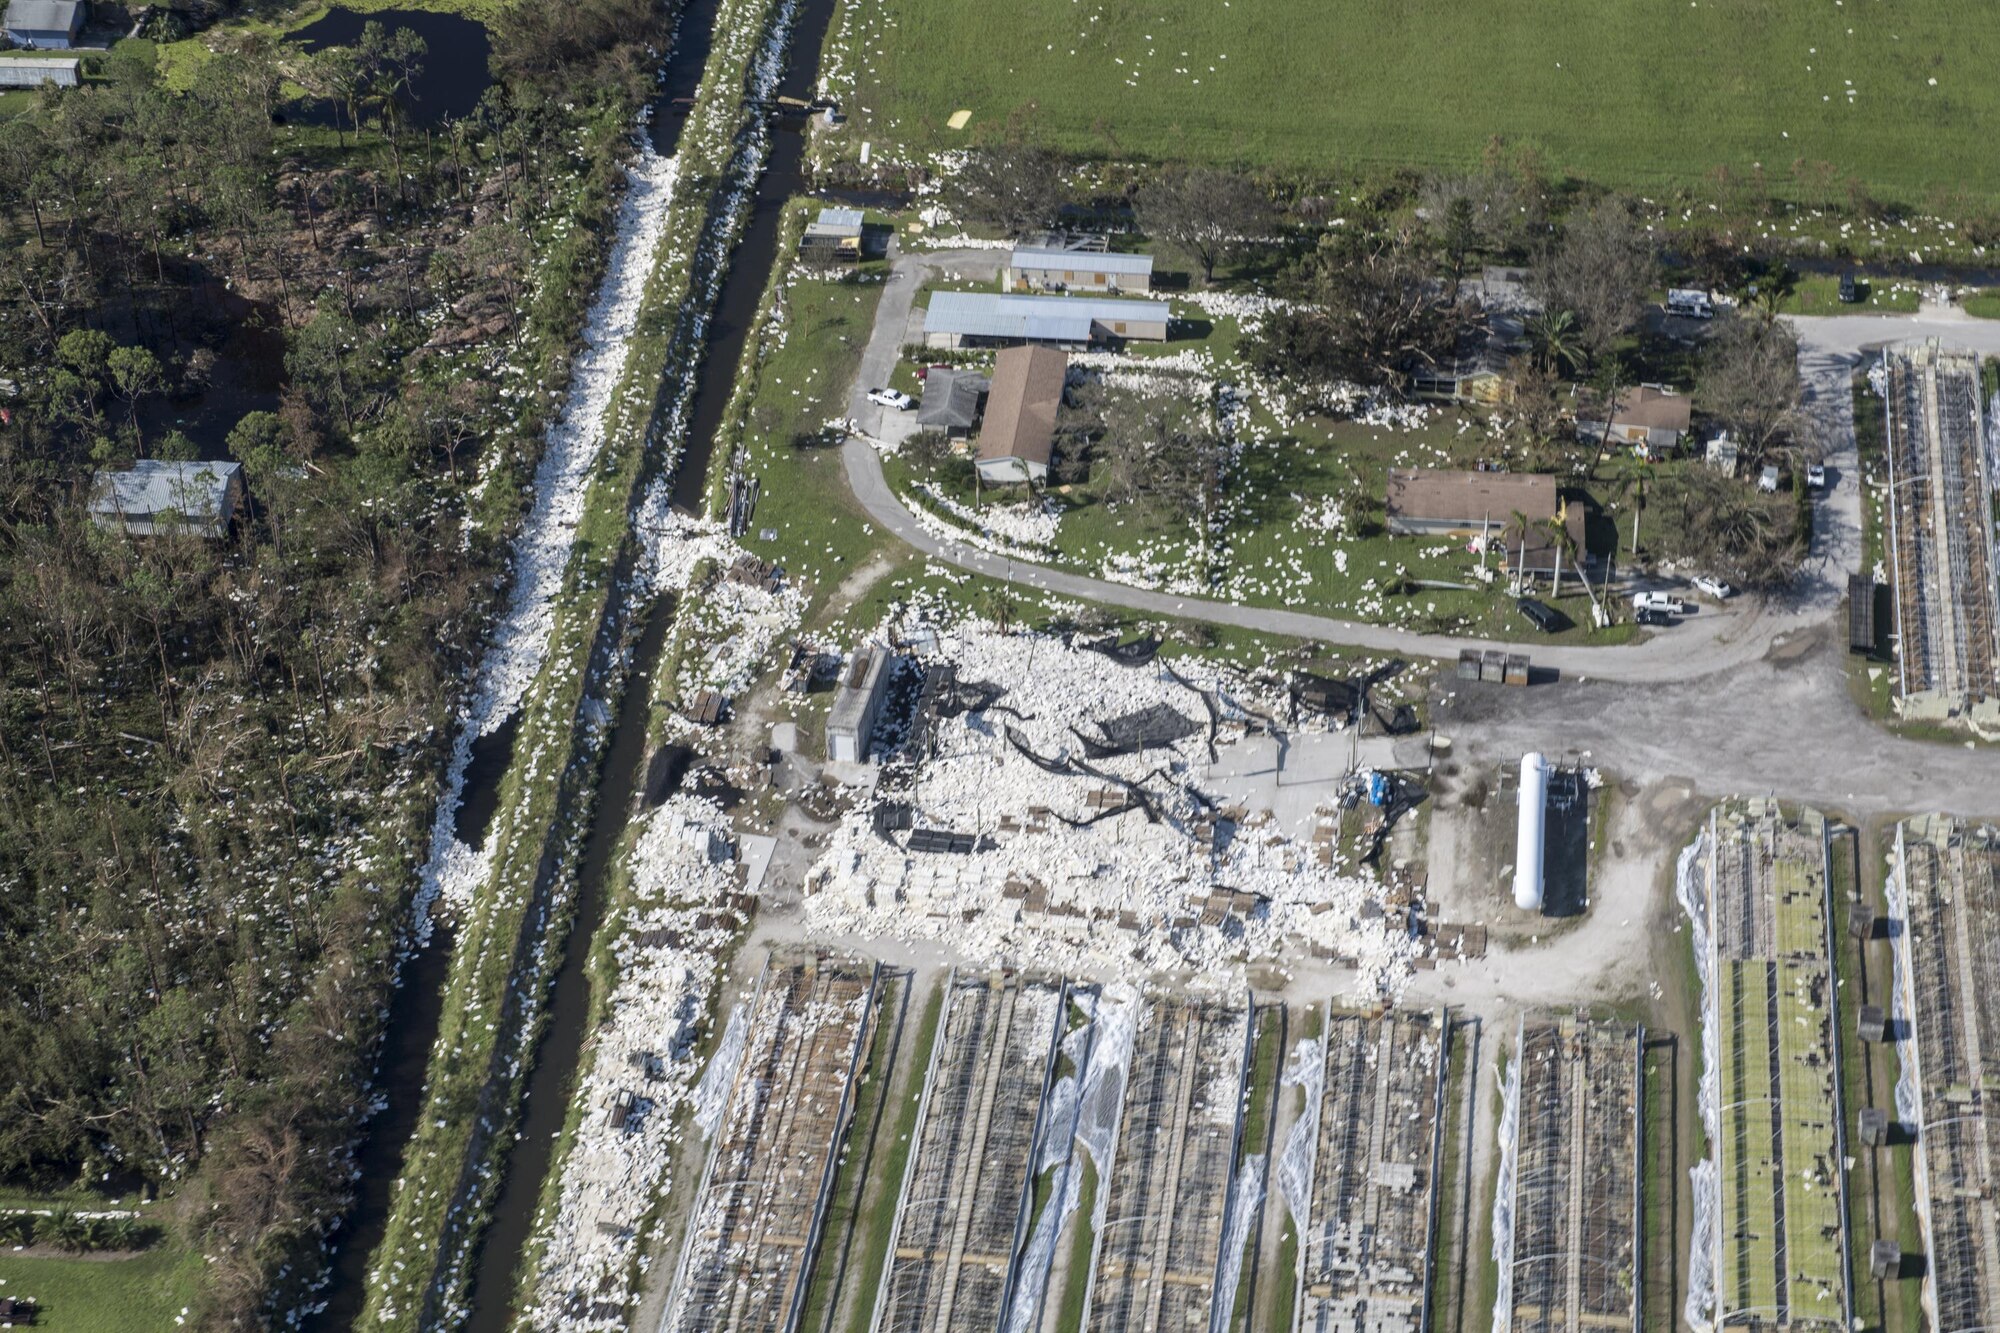 Many buildings and houses show damage from Hurricane Irma, Sept. 13, 2017, in Florida. The 563d Rescue Group prepositioned aircraft and personnel for rescue operations after Hurricane Irma made landfall in Florida. (U.S. Air Force photo by Tech. Sgt. Zachary Wolf)